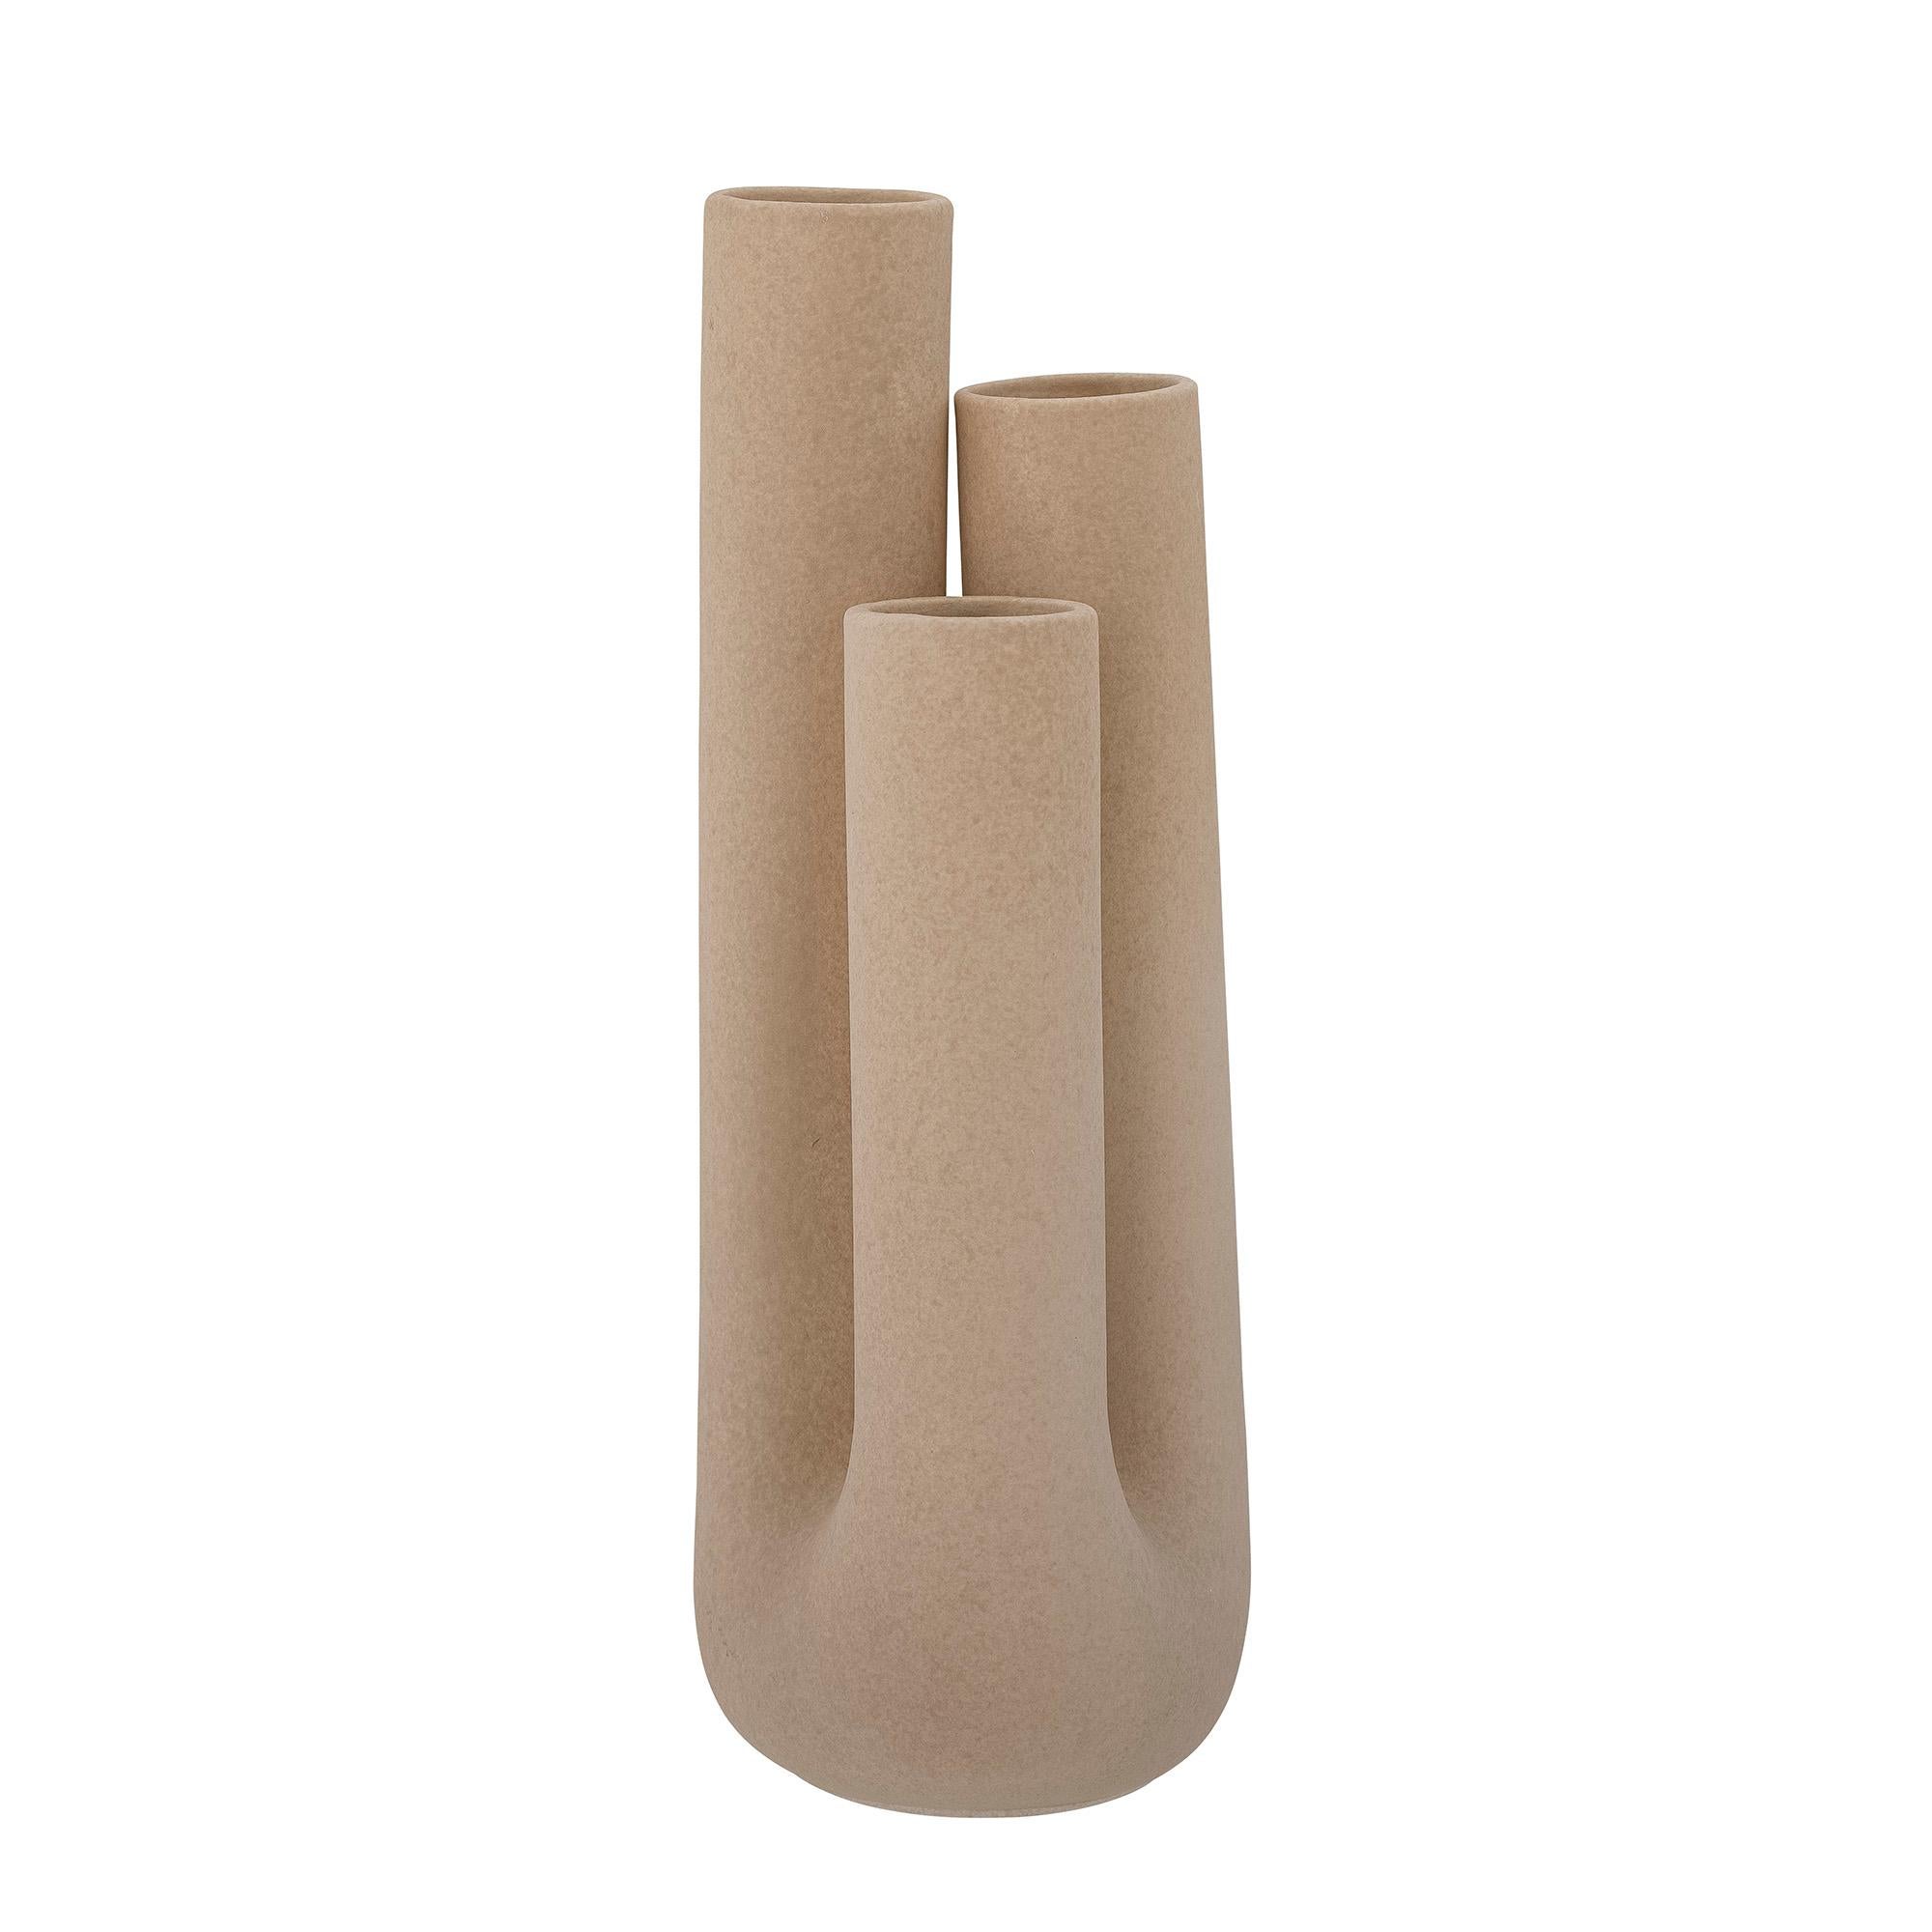 Handmade stoneware vase, natural toned painted finish with sablé (sand grain) texture.